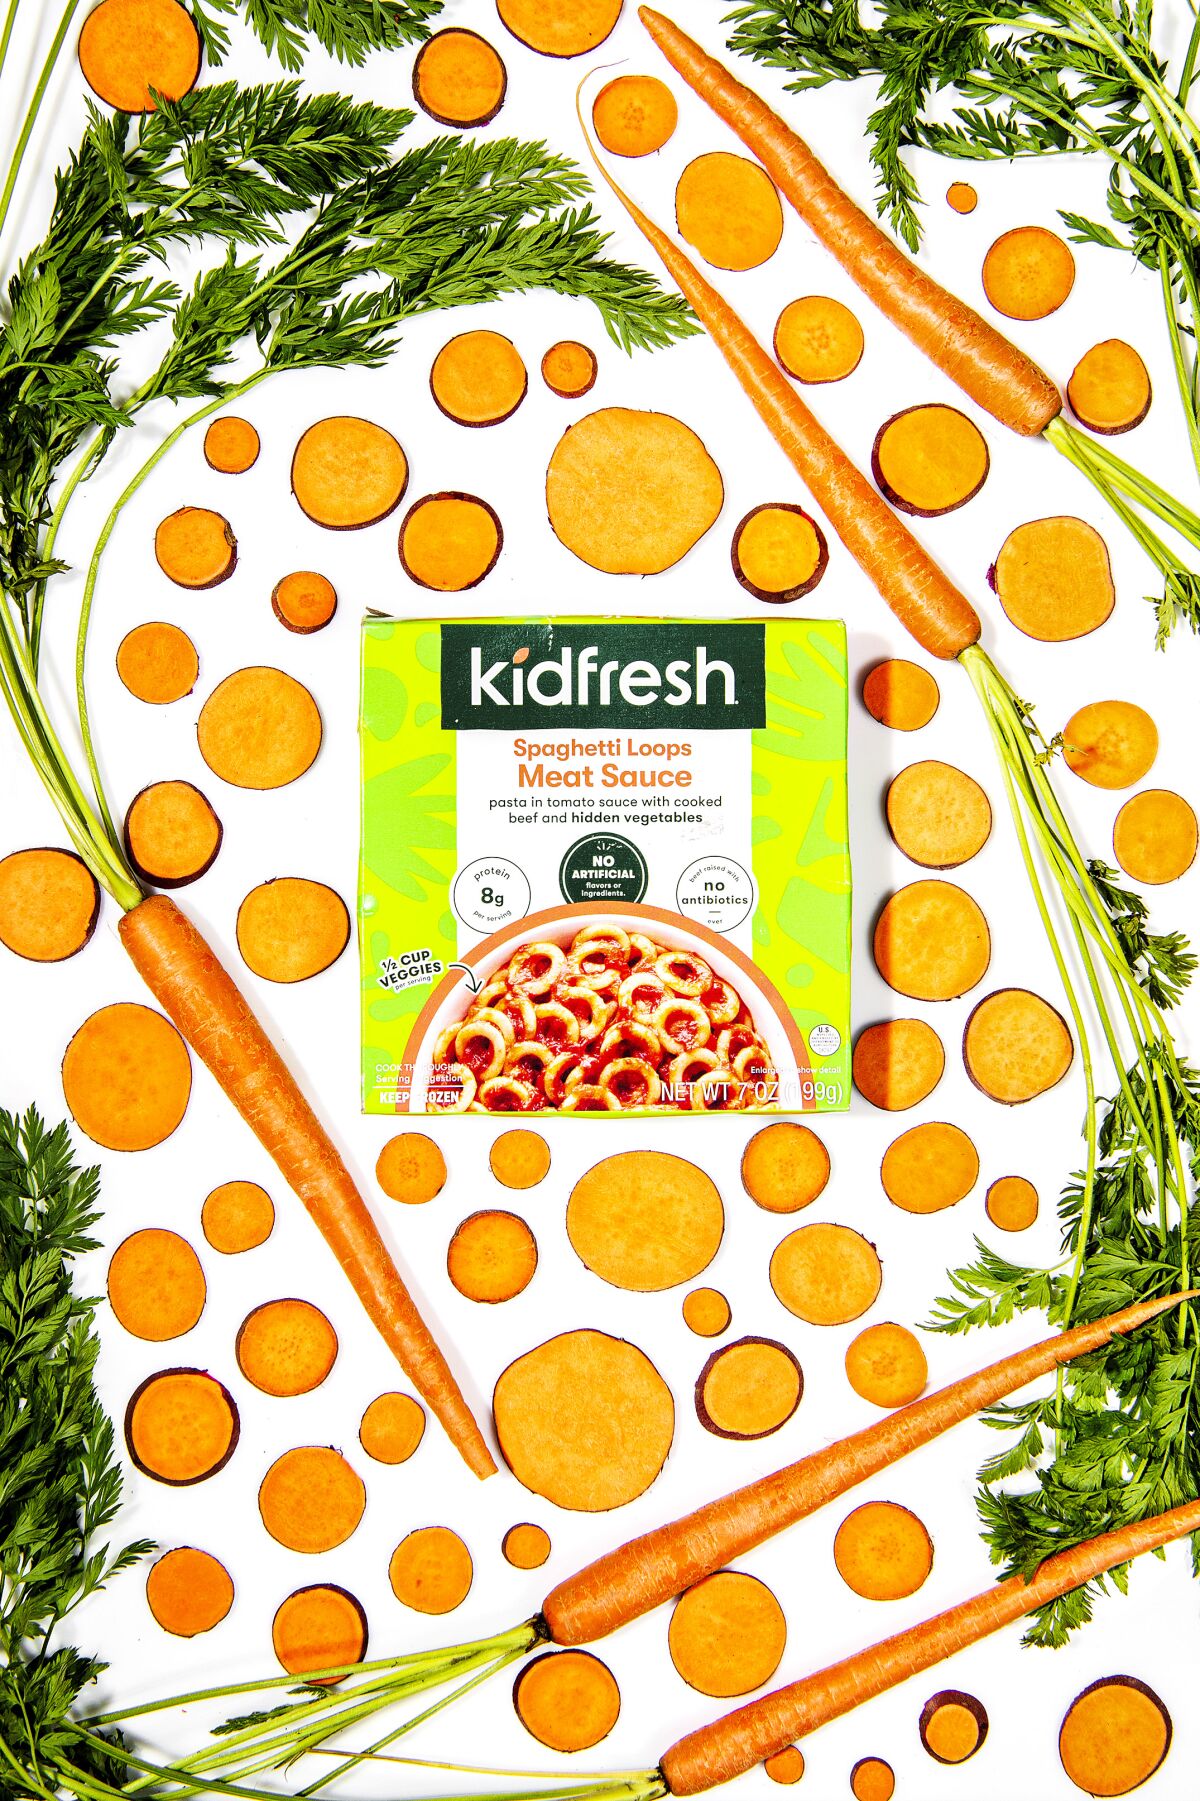 A package of Kidfresh Spaghetti Loops with sliced sweet potatoes and whole carrots 